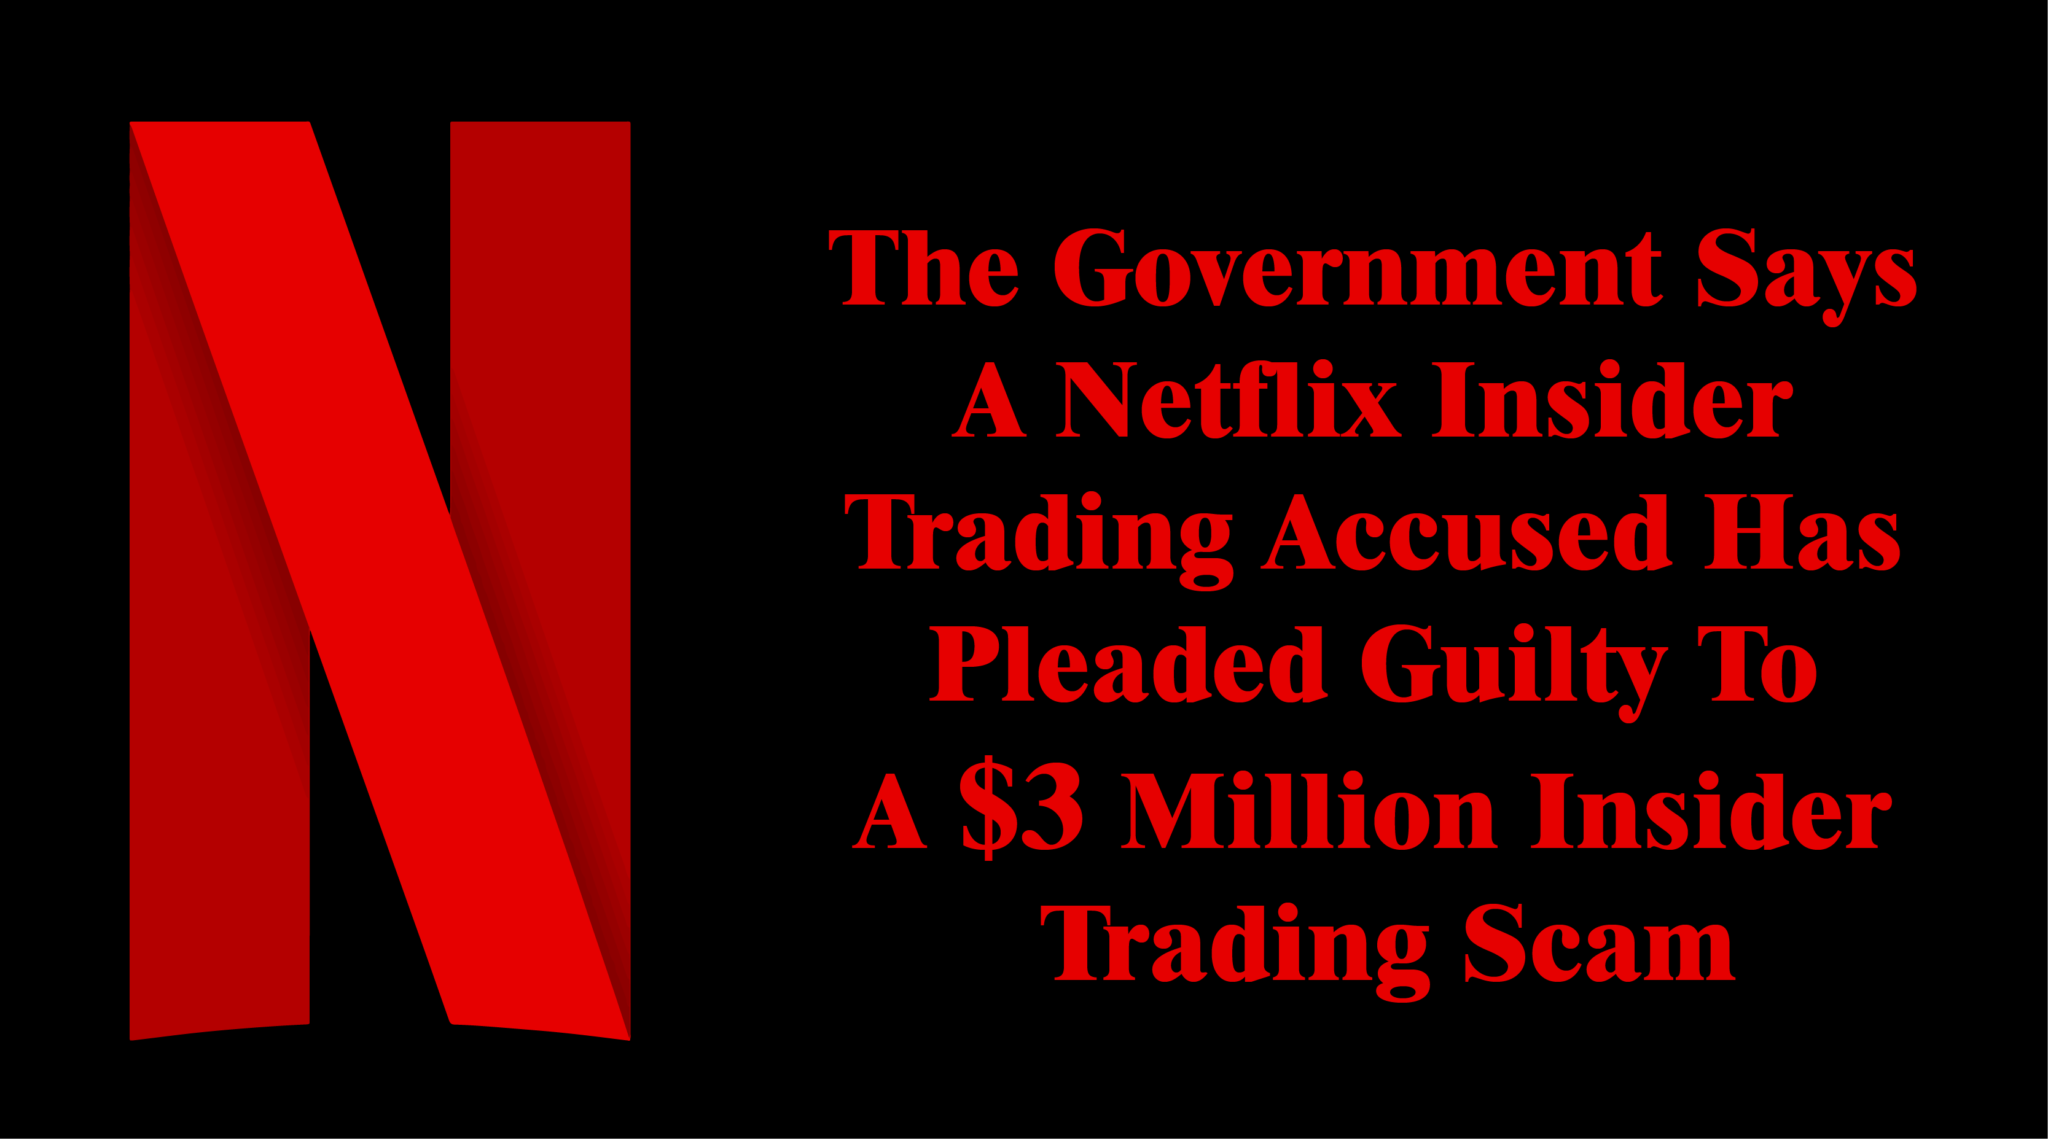 The Government Says A Netflix Insider Trading Accused Has Pleaded Guilty To A $3 Million Insider Trading Scam